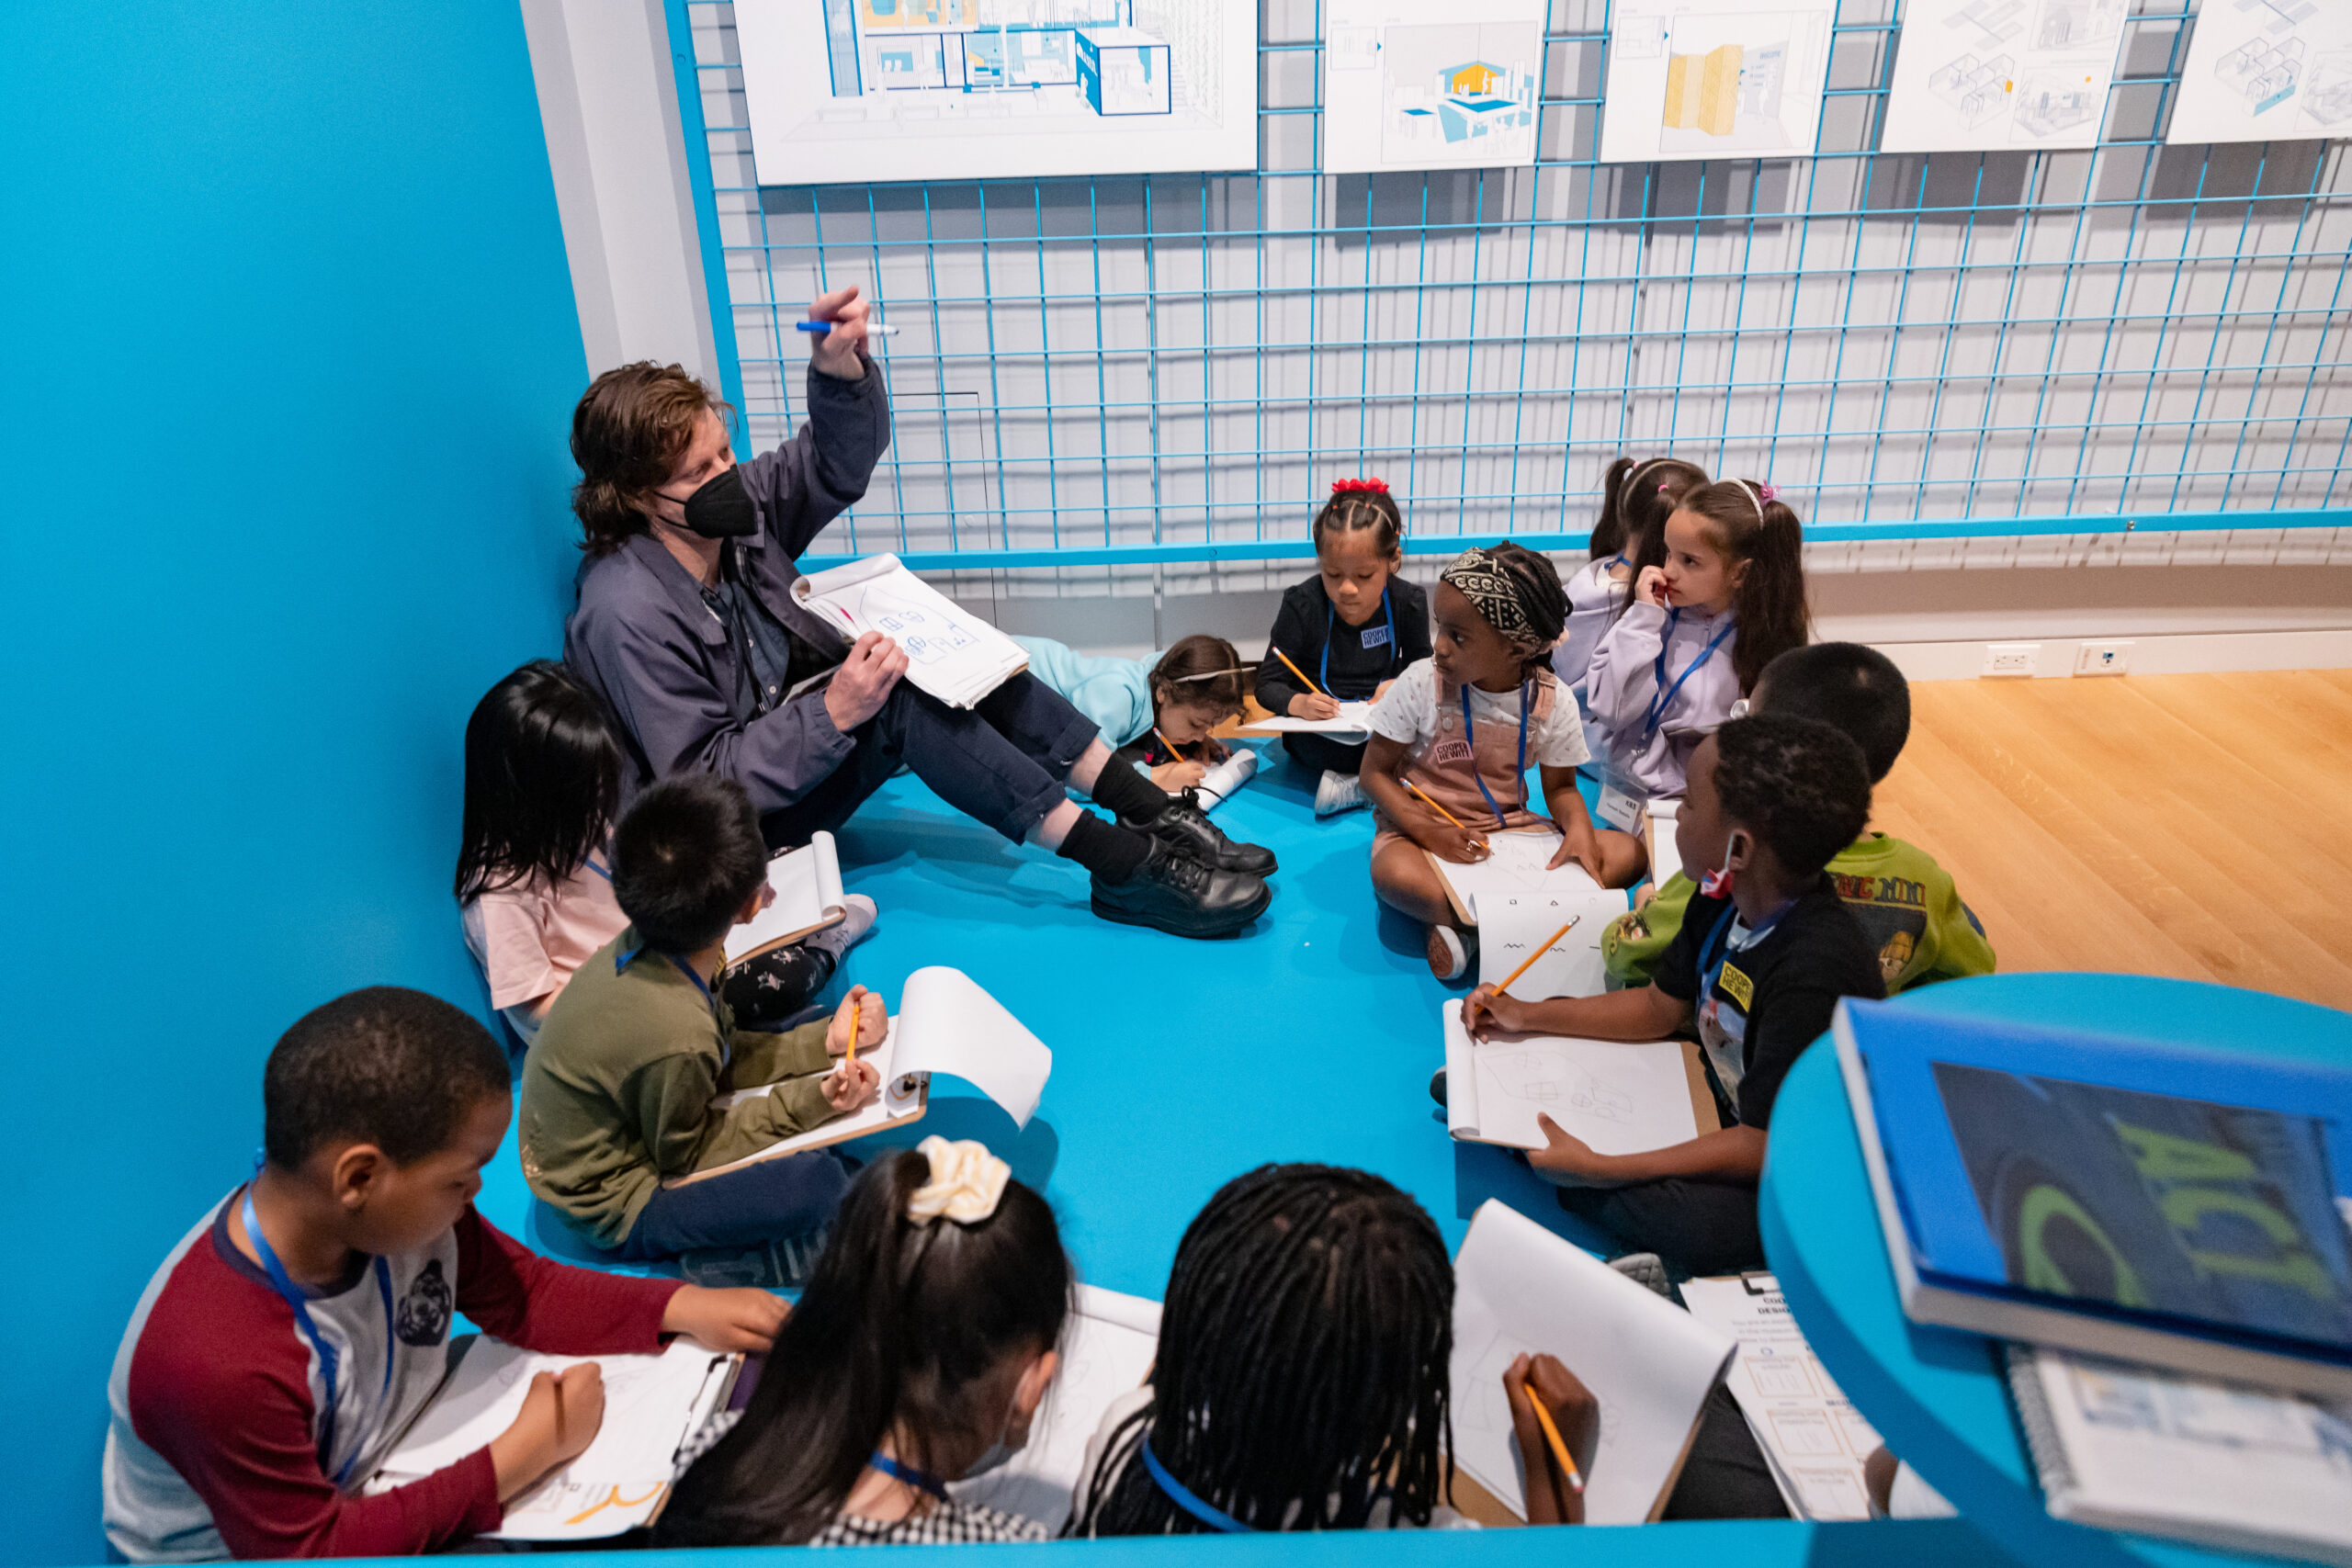 A photograph of an adult and group of children sitting in a circle on the ground in the corner of a room doing an activity. Each child has a clipboard and pencil and are listening to the adult. The light-skinned adult has short brown hair, is holding a clipboard with a drawing of a house and is pointing. The wall behind them is bright blue.